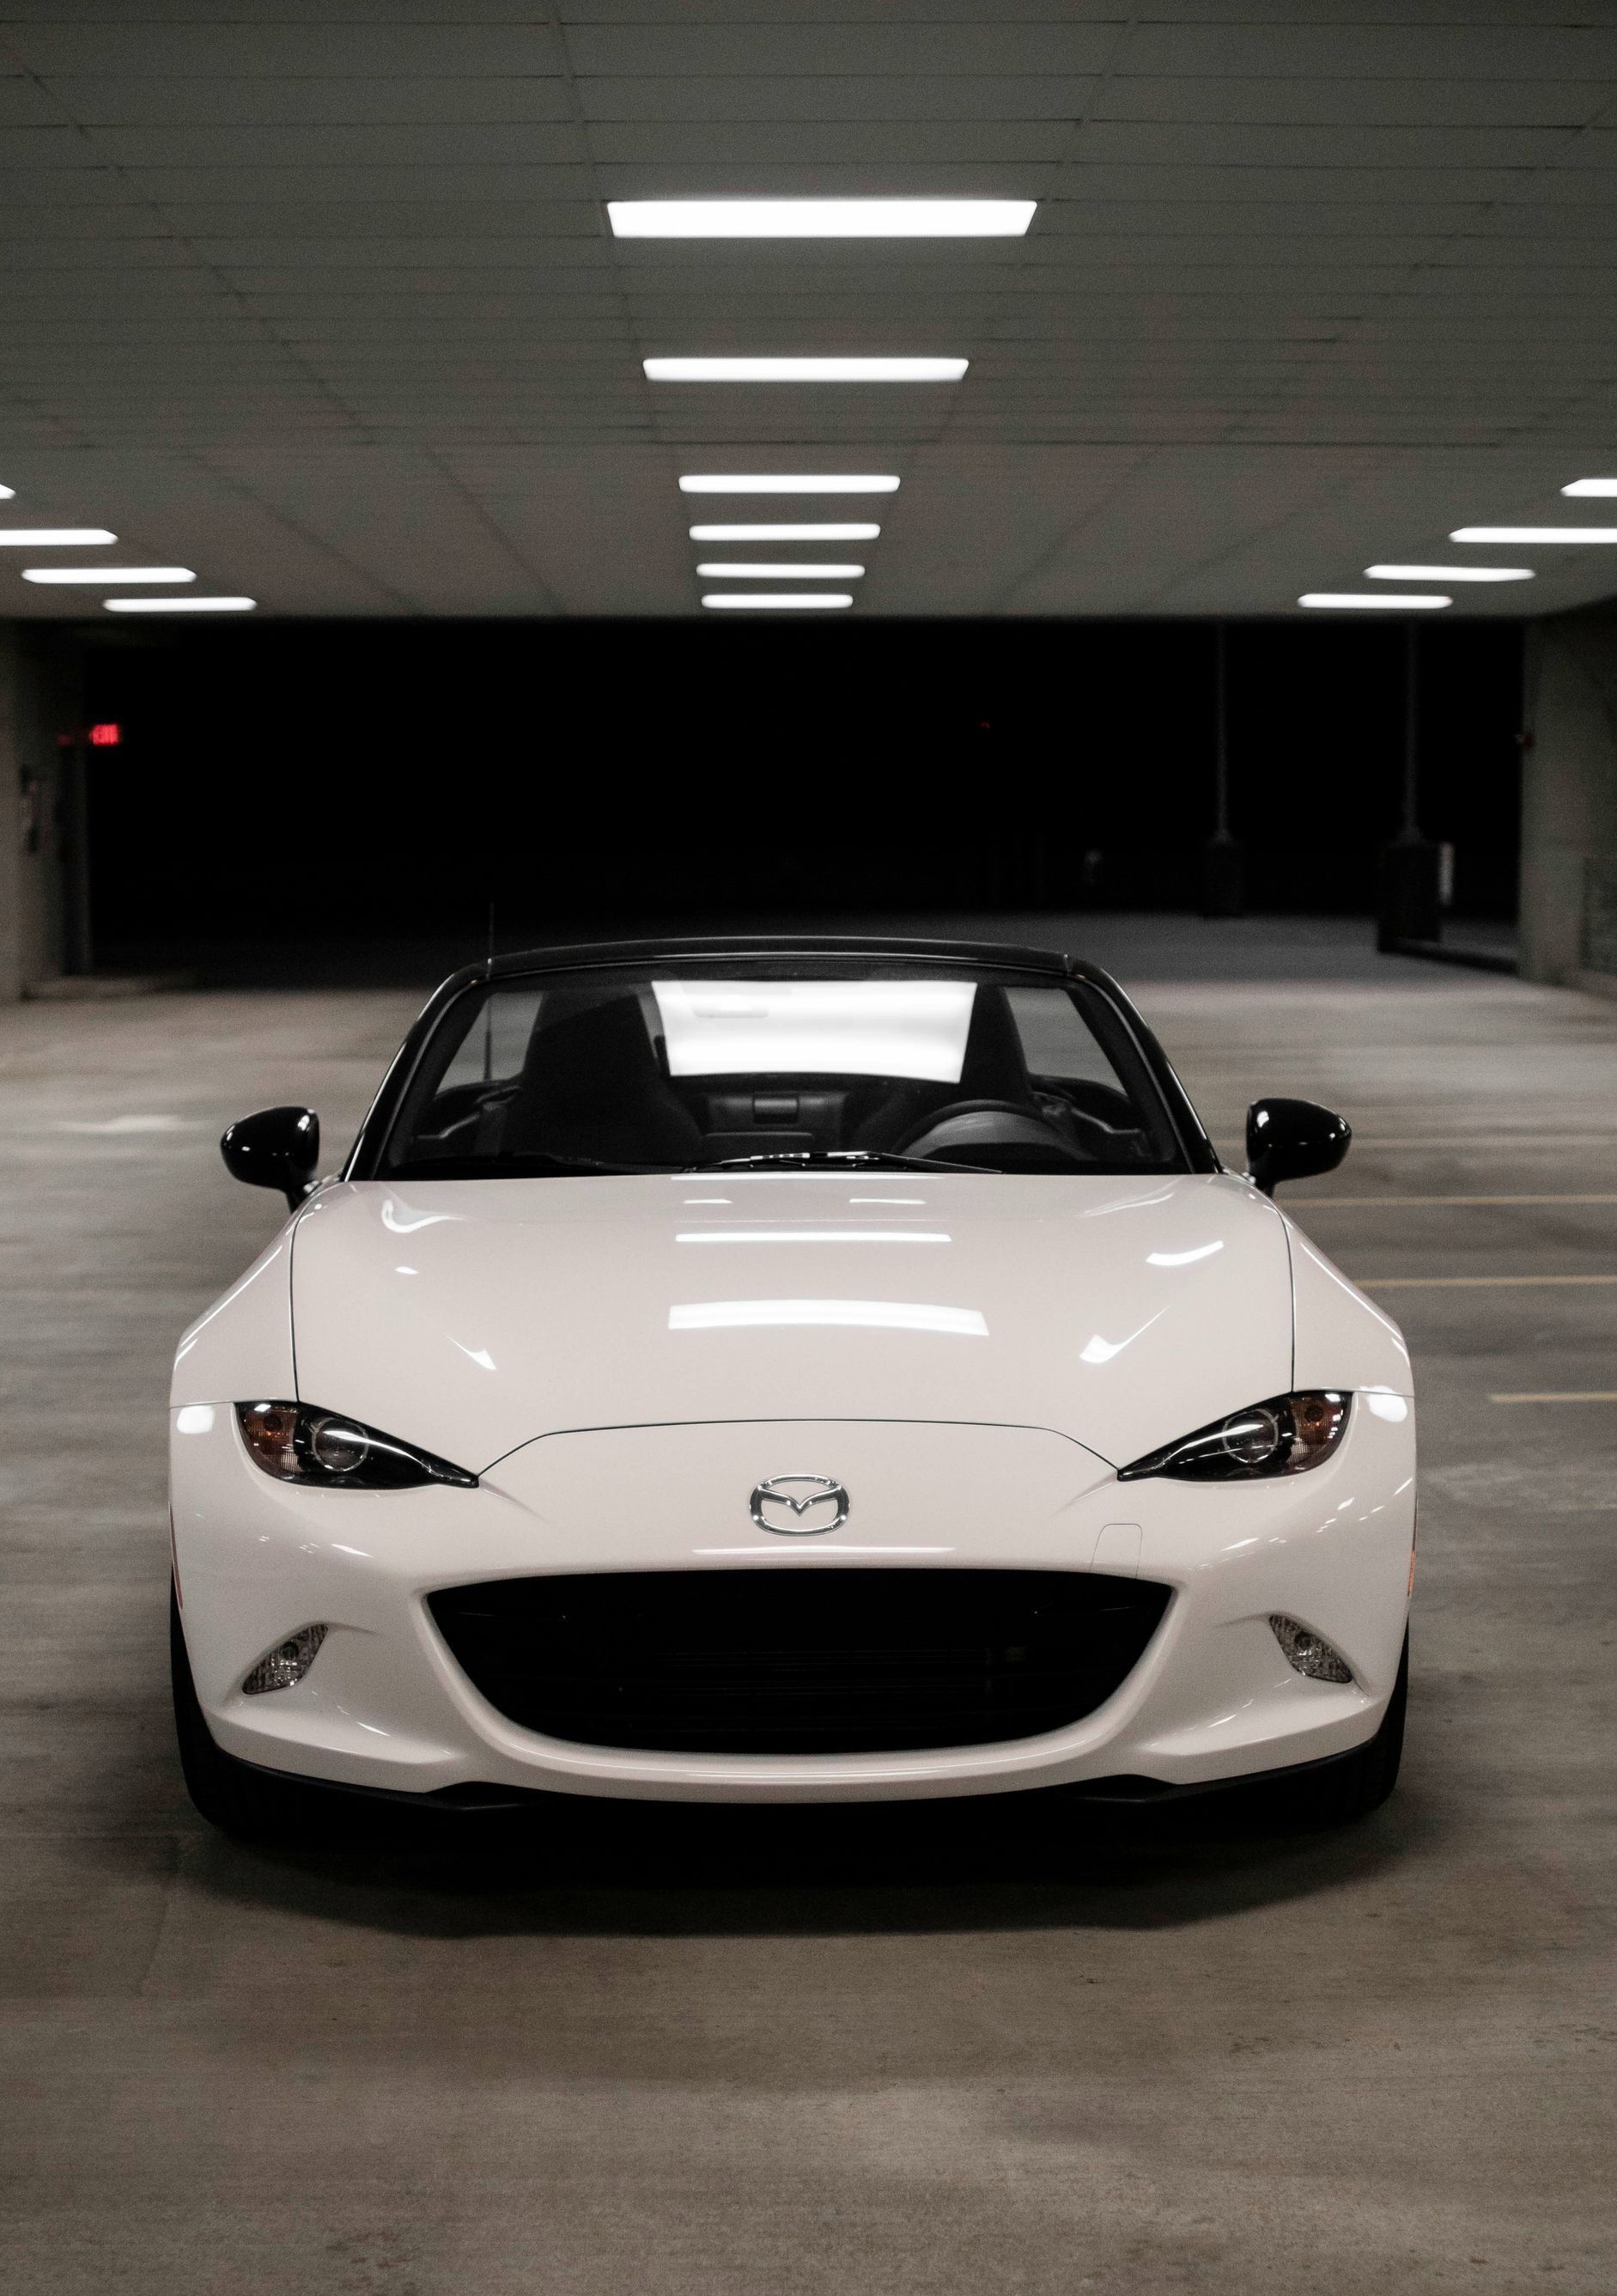 Front view of a white Mazda MX-5 in a parking lot.